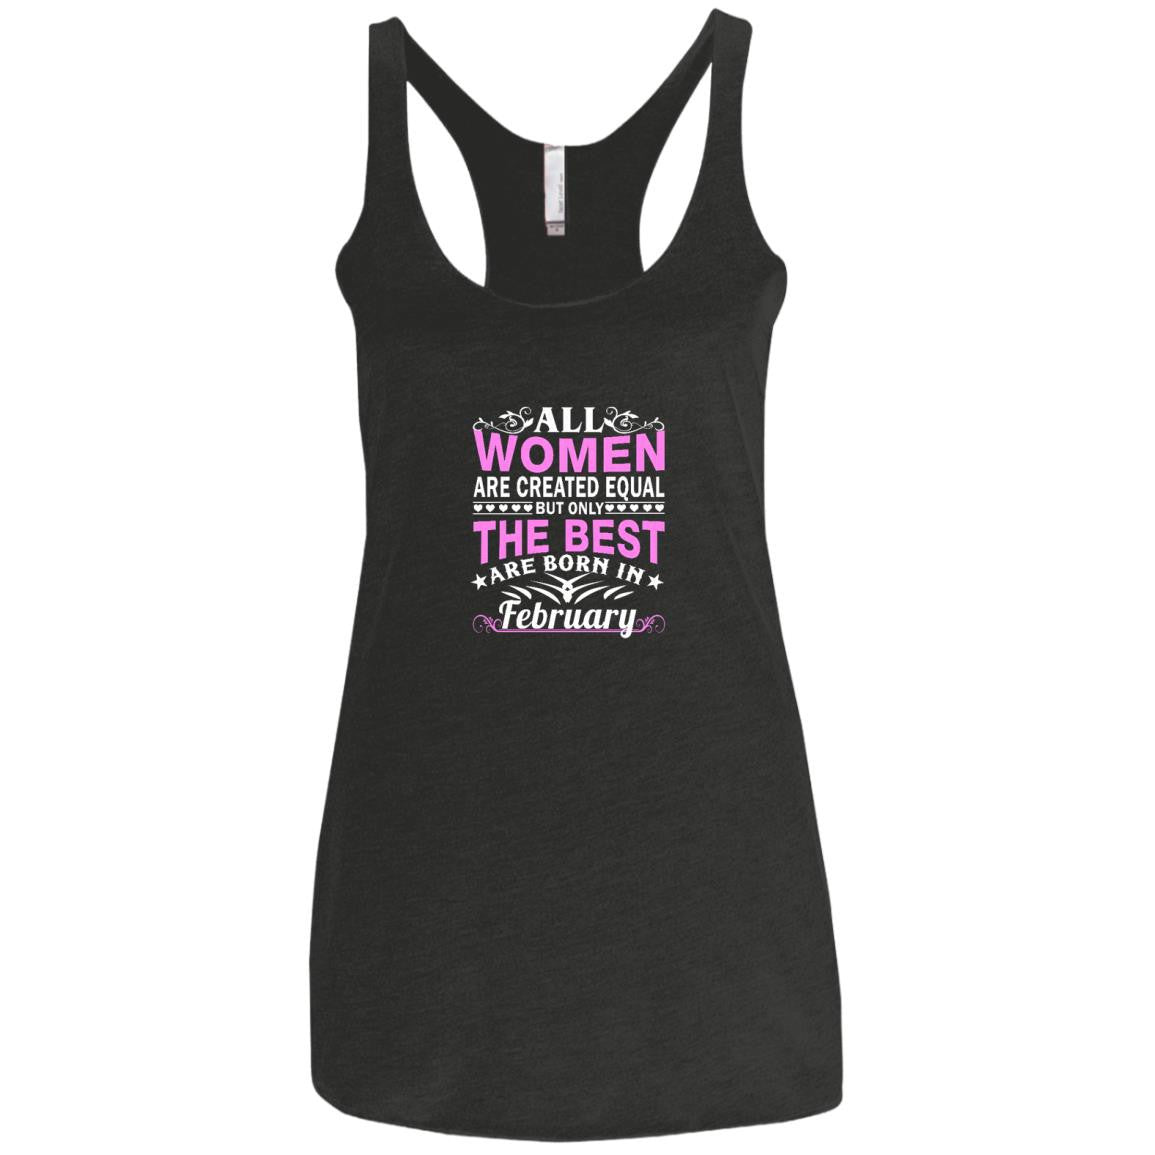 All Women Are Created Equal But Only The Best Are Born In February shirt, tank